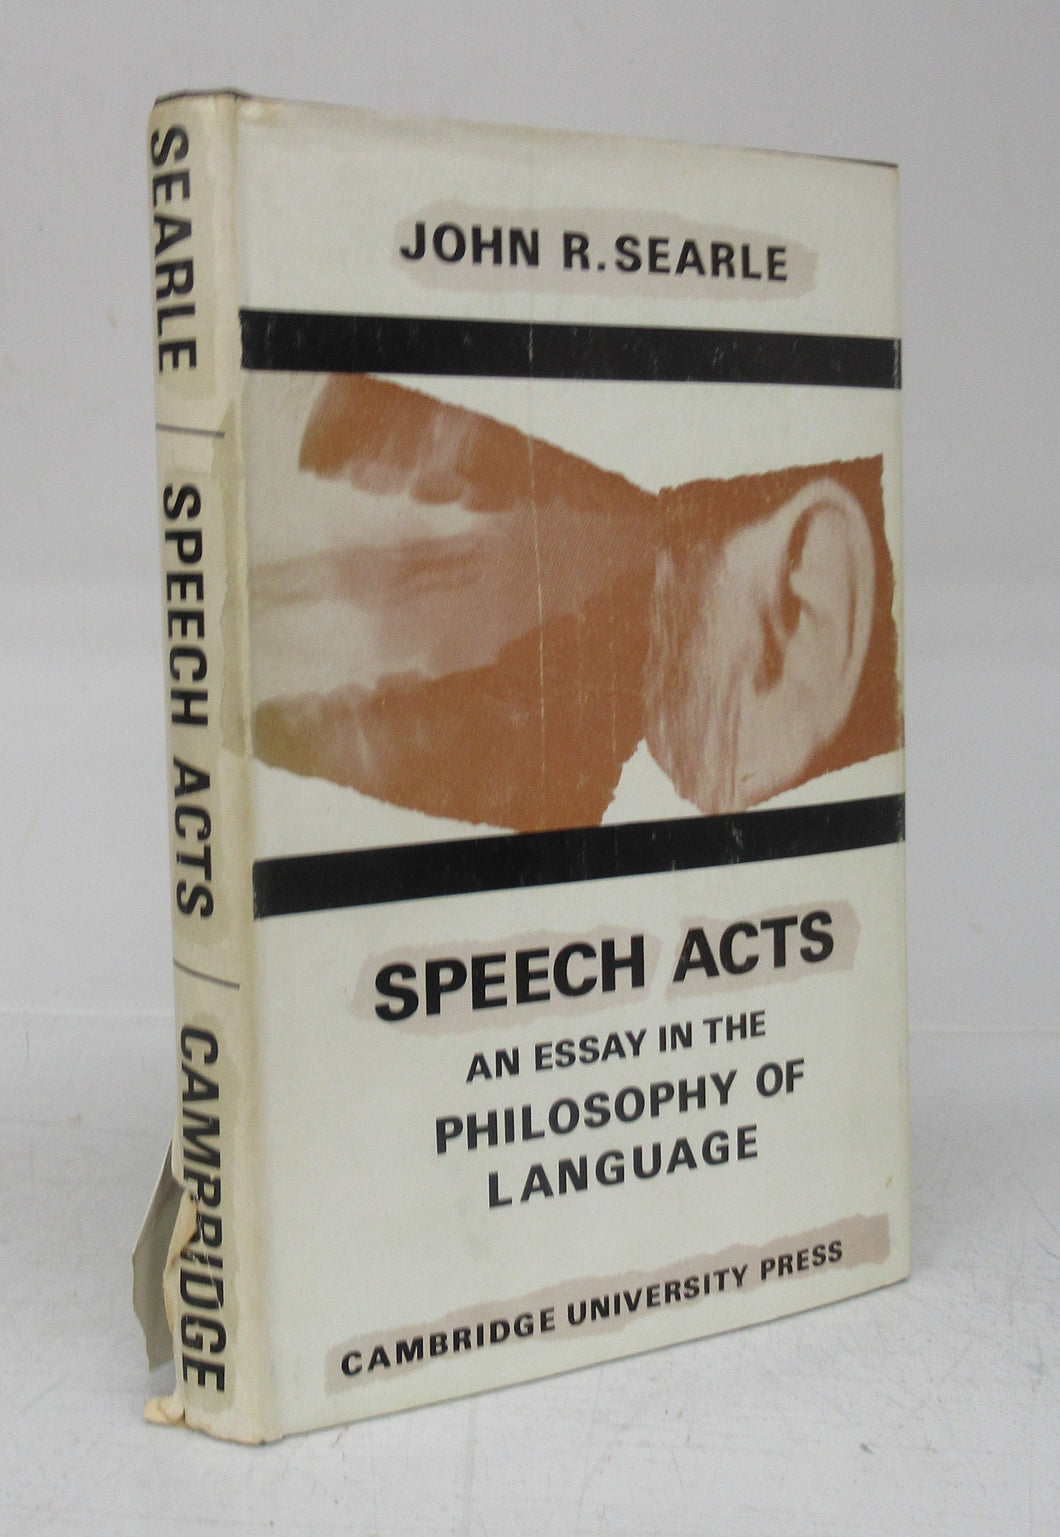 Speech Acts: An Essay in the Philosophy of Language